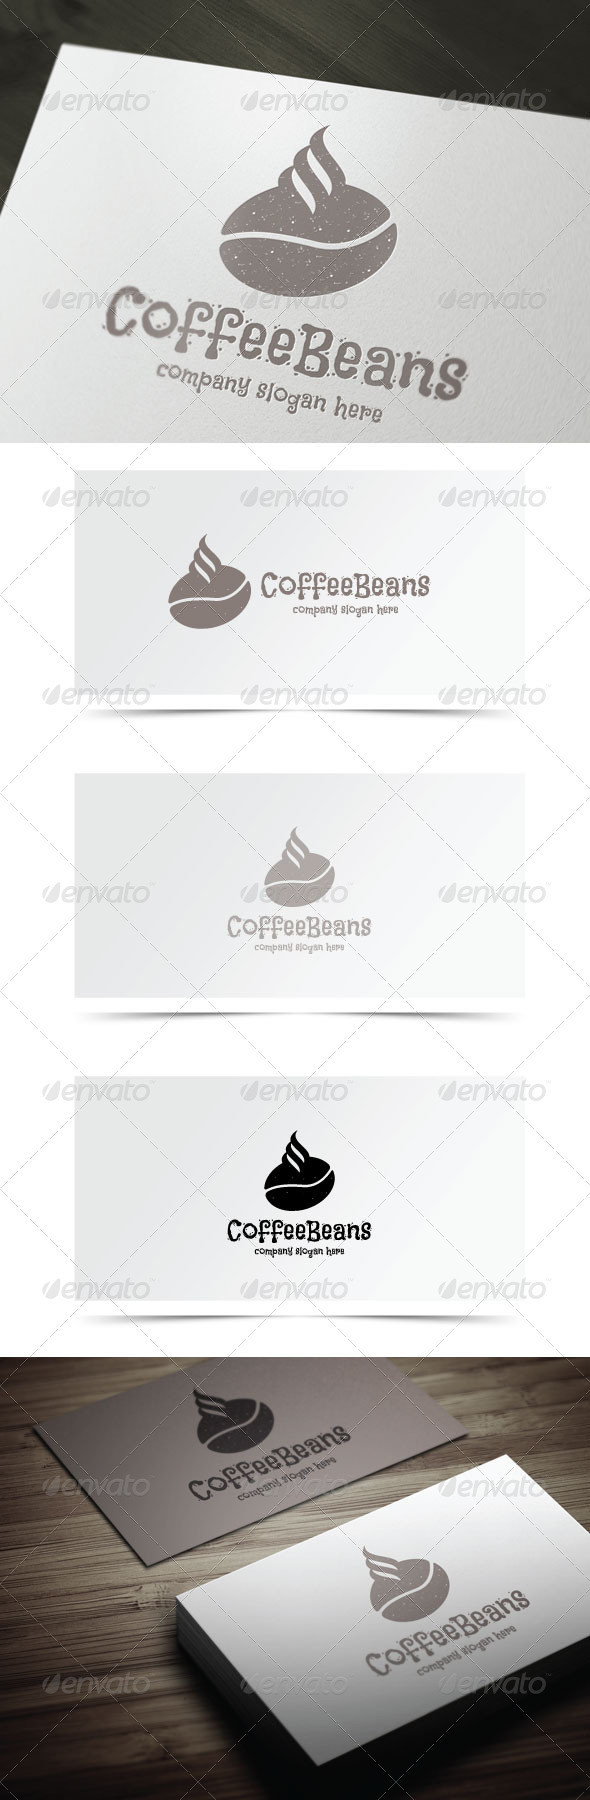 Coffee beans preview